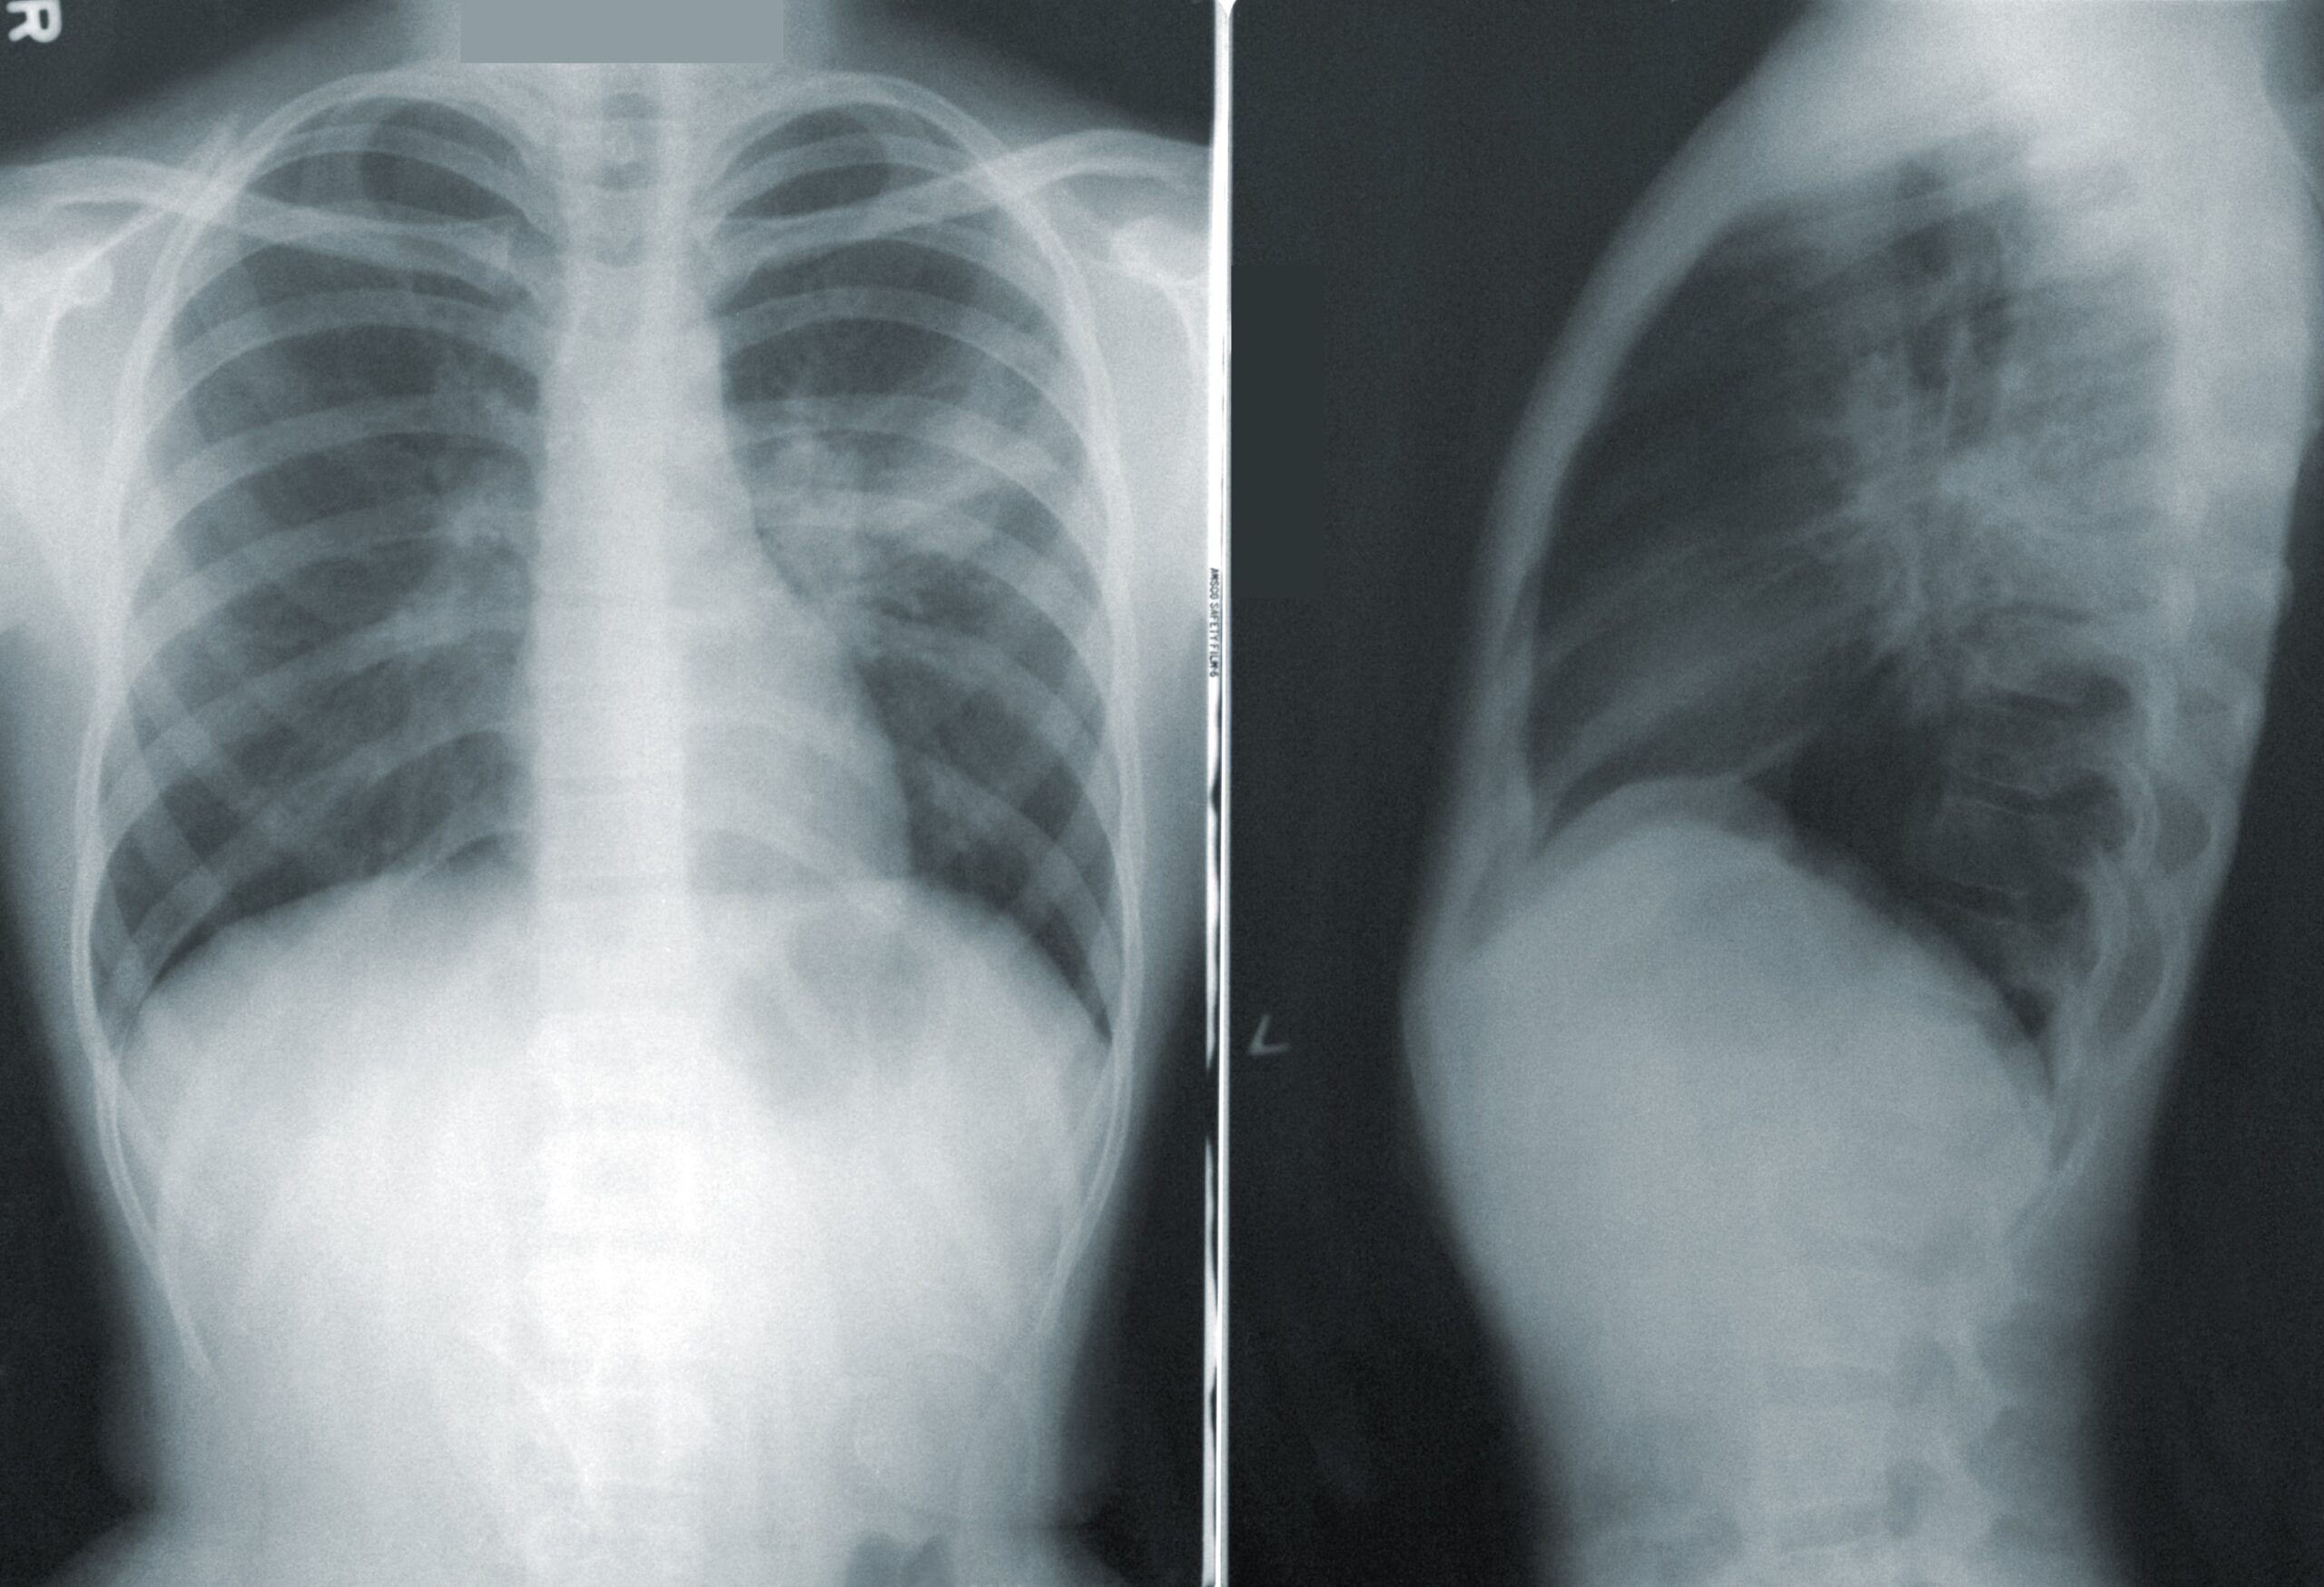 An X-Ray showing pneumonia in the lungs of a COVID-19 patient.